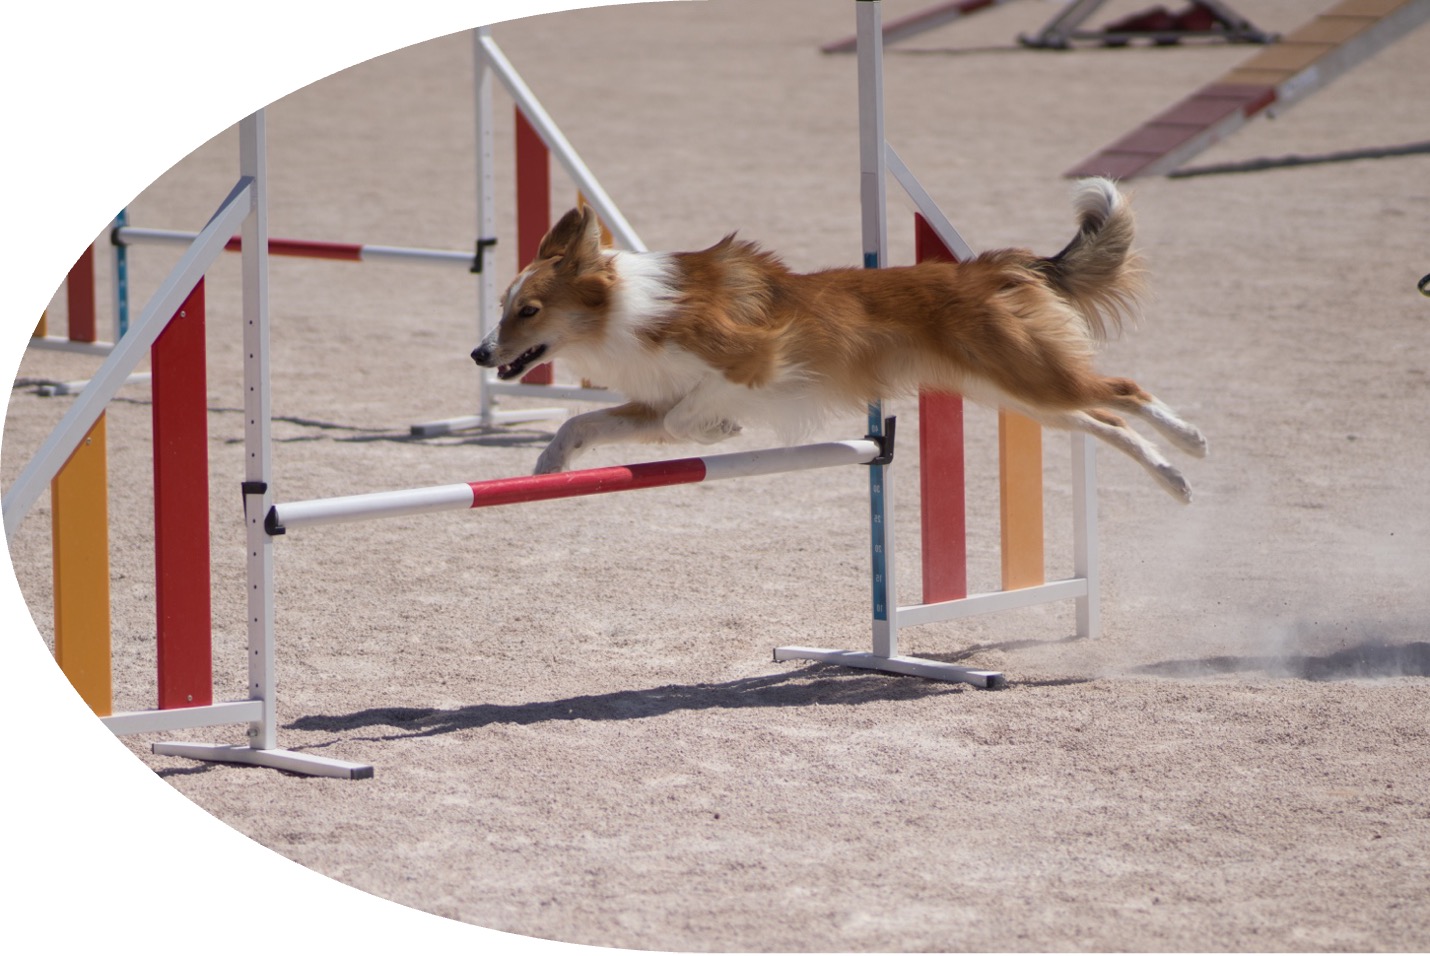 Staying agile: a dog passing through an obstacle course.